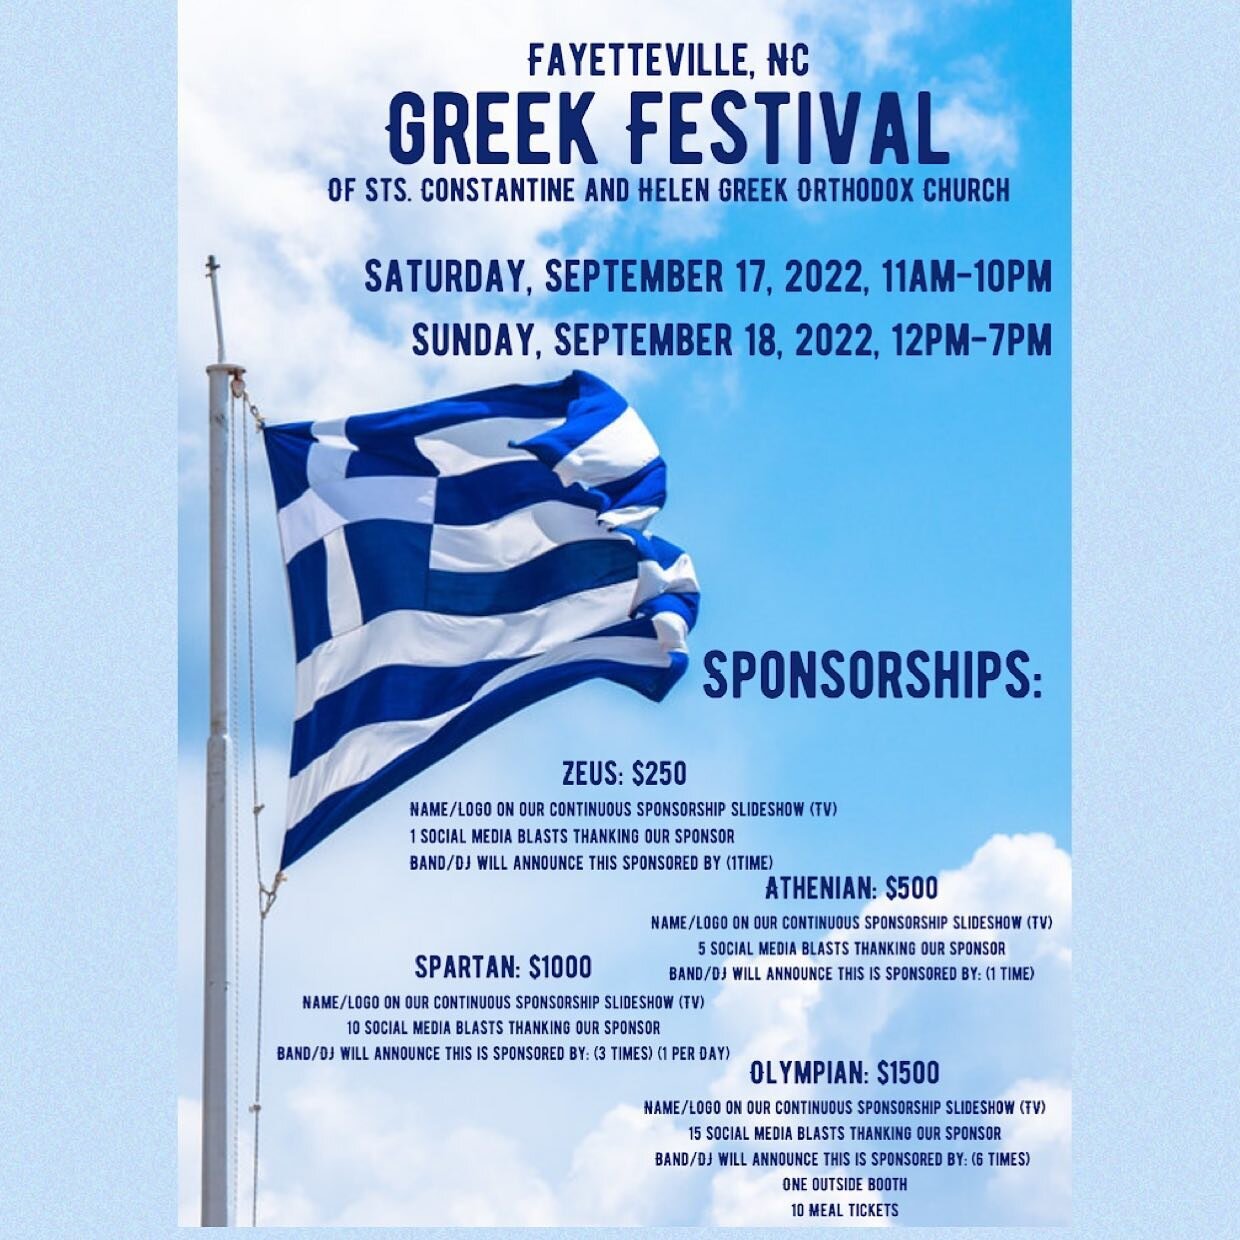 The Greek Festival is coming up and we're looking for sponsors and volunteers.
For more information on Sponsorships and Volunteering, please contact Lia Hasapis at lhasapis19@gmail.com. 
#Greek #fayettevillenc #greekfood #greekfestival